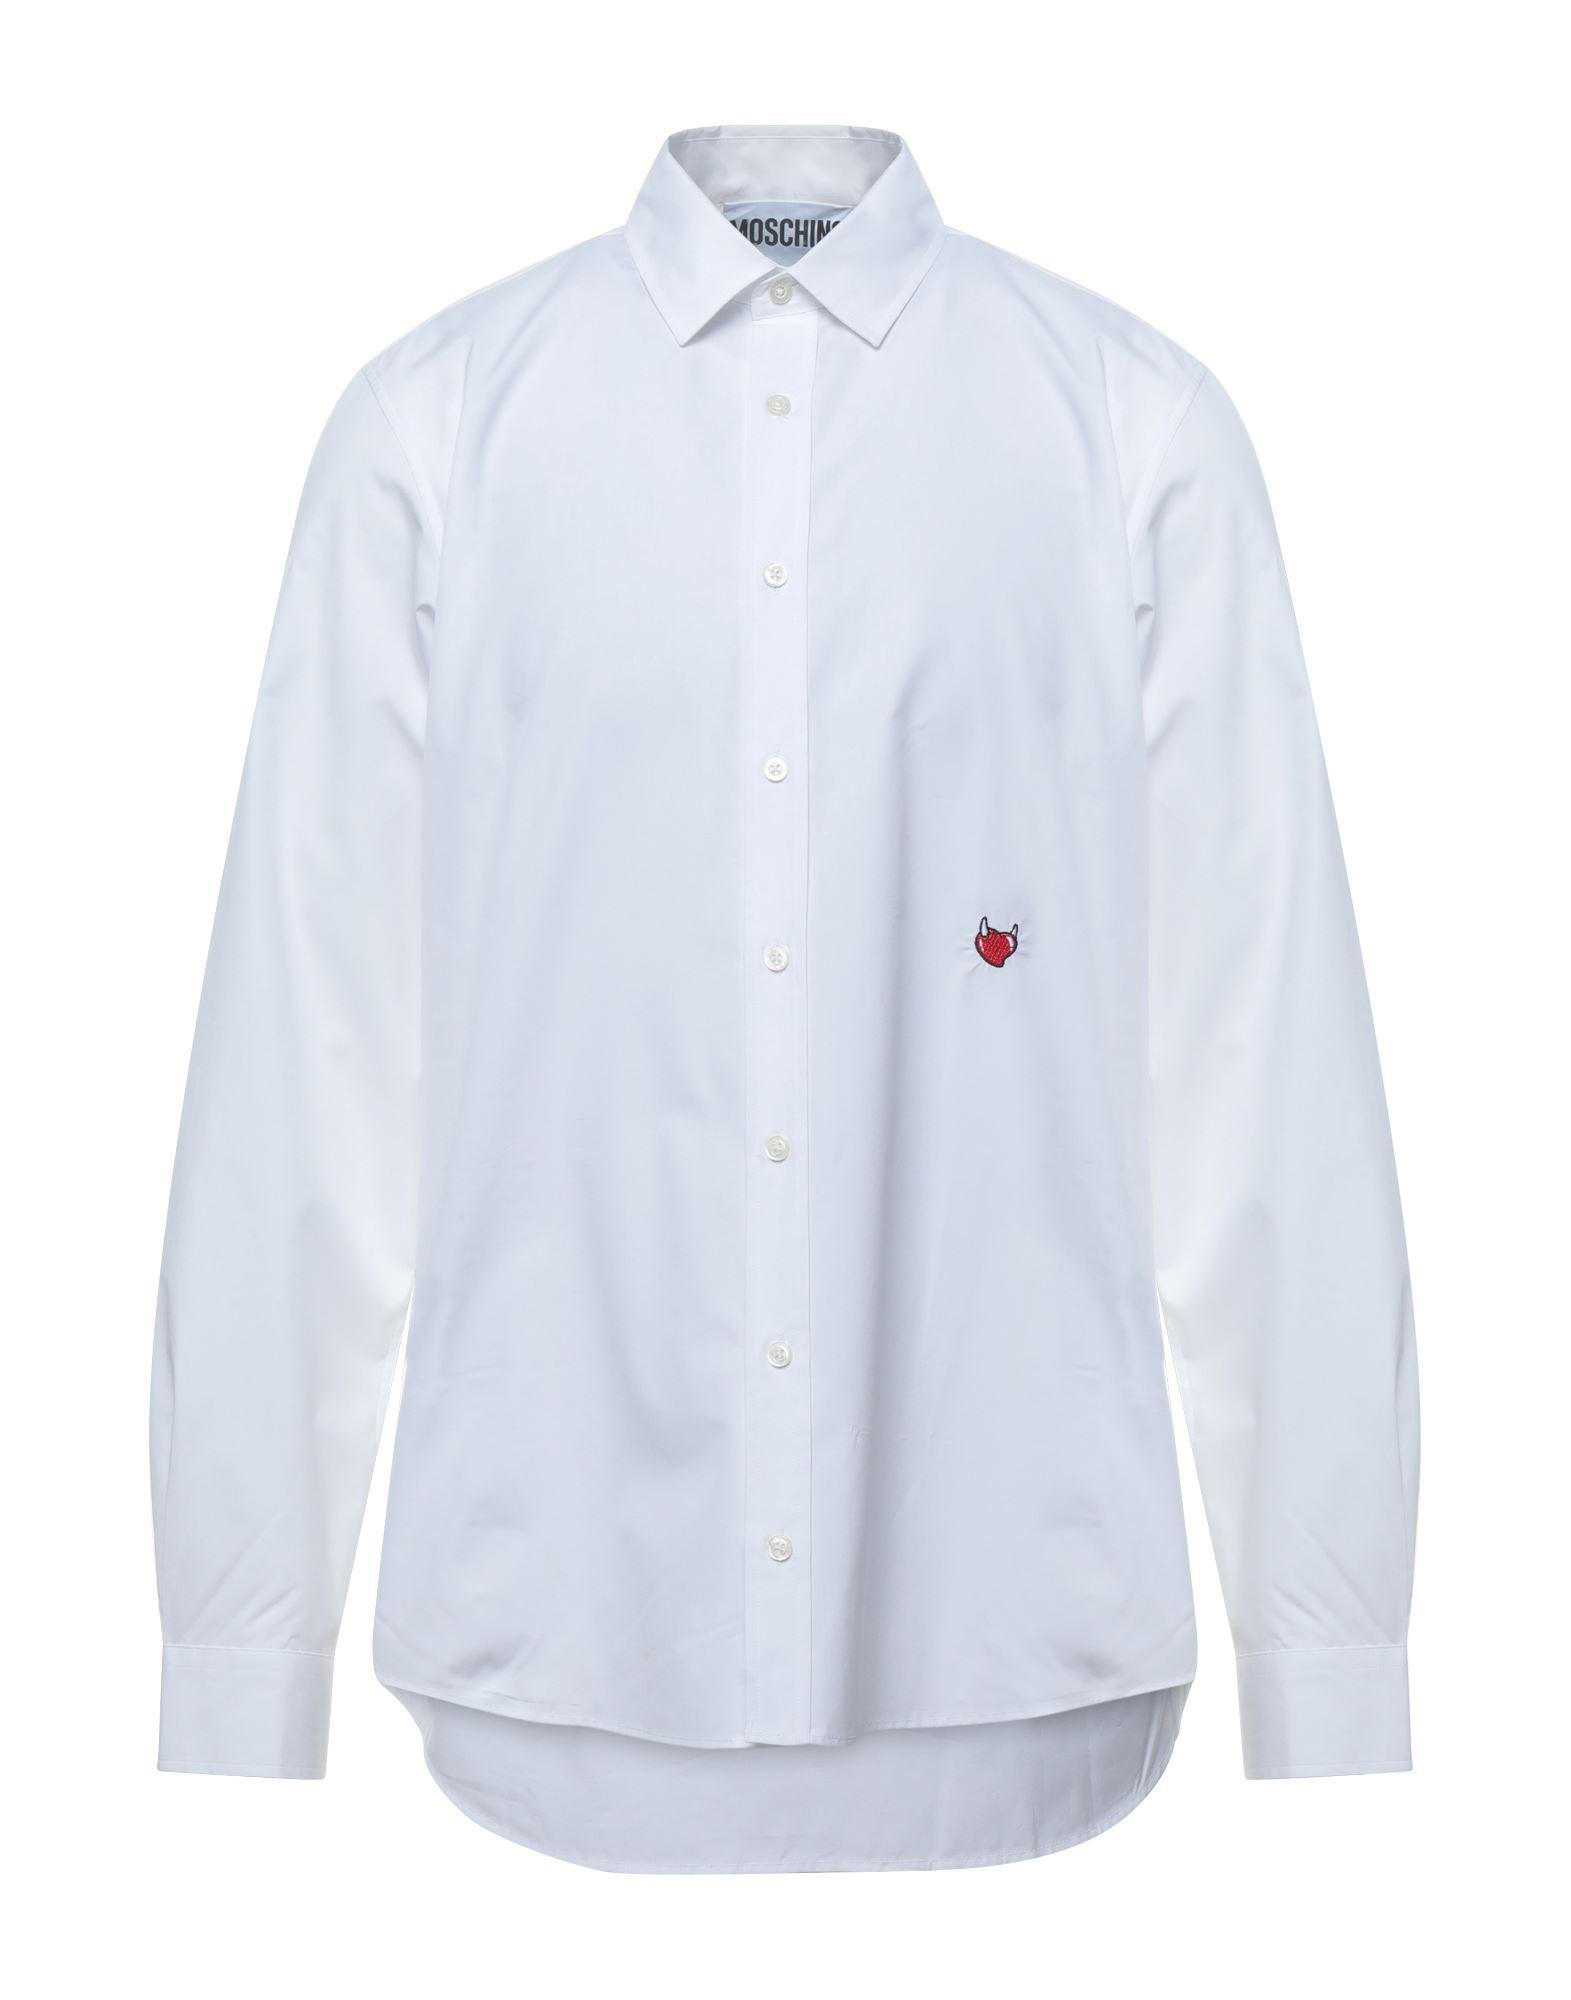 Moschino Shirt in White for Men - Lyst